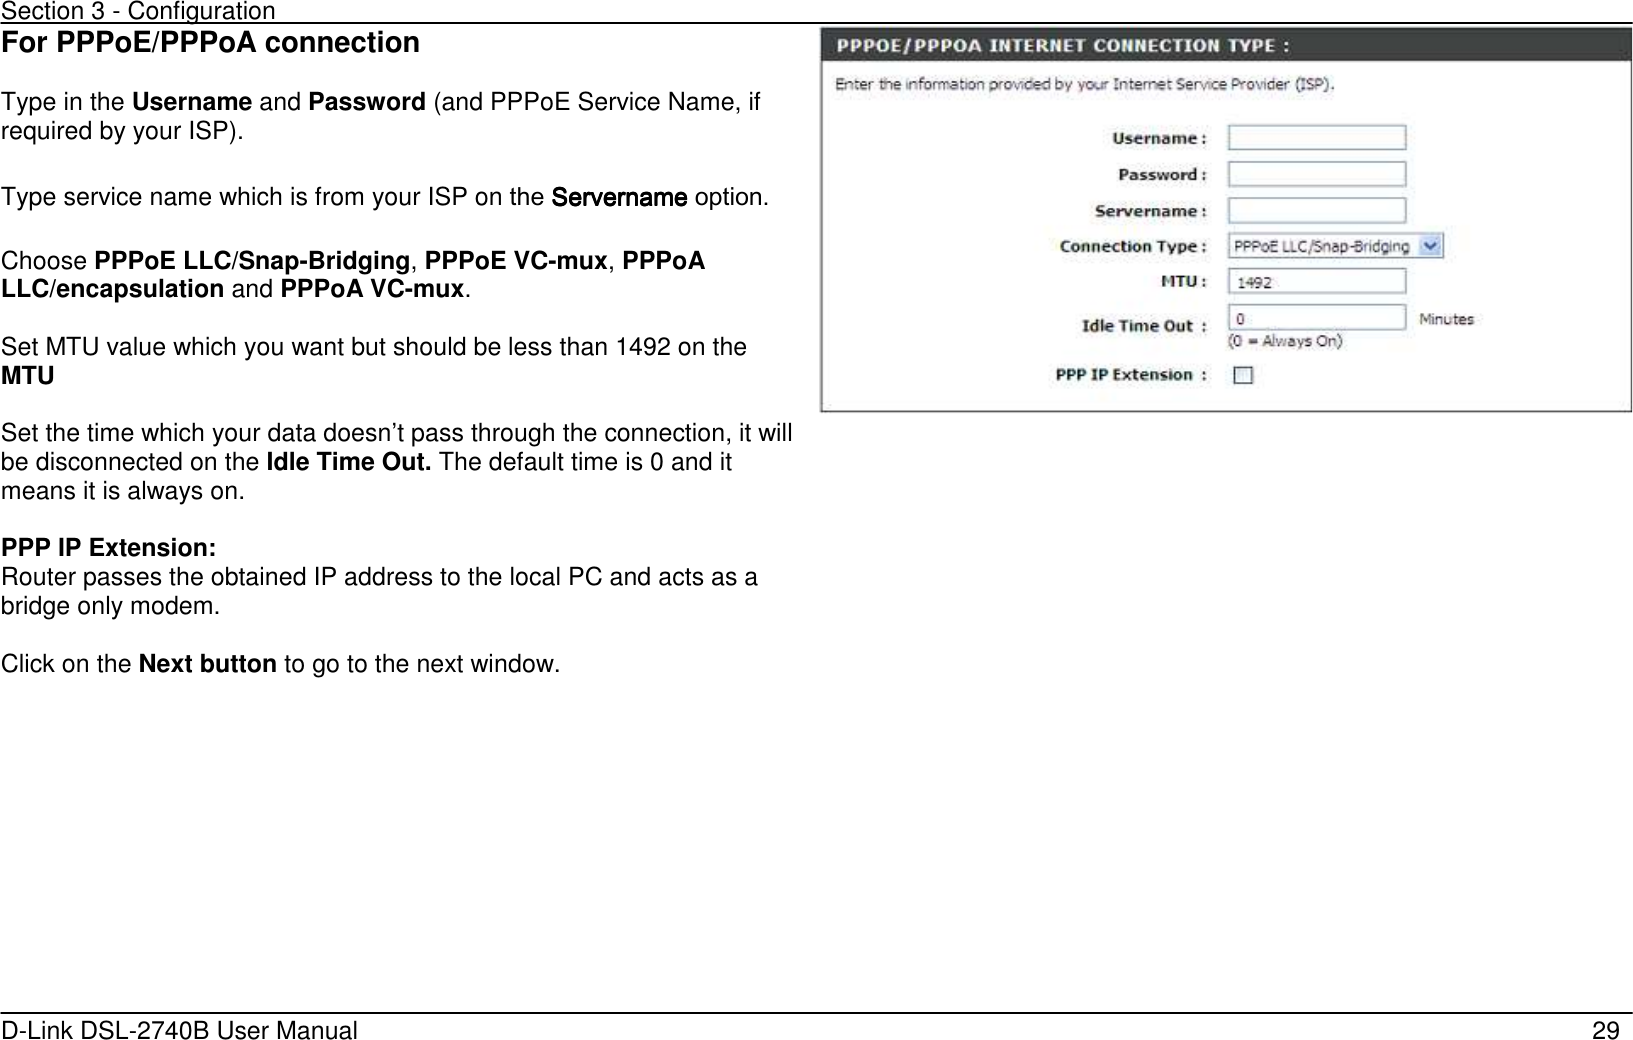 Section 3 - Configuration   D-Link DSL-2740B User Manual                                                  29 For PPPoE/PPPoA connection  Type in the Username and Password (and PPPoE Service Name, if required by your ISP).    Type service name which is from your ISP on the ServernameServernameServernameServername    option.      Choose PPPoE LLC/Snap-Bridging, PPPoE VC-mux, PPPoA LLC/encapsulation and PPPoA VC-mux.  Set MTU value which you want but should be less than 1492 on the MTU    Set the time which your data doesn’t pass through the connection, it will be disconnected on the Idle Time Out. The default time is 0 and it means it is always on.  PPP IP Extension:   Router passes the obtained IP address to the local PC and acts as a bridge only modem. Click on the Next button to go to the next window. 